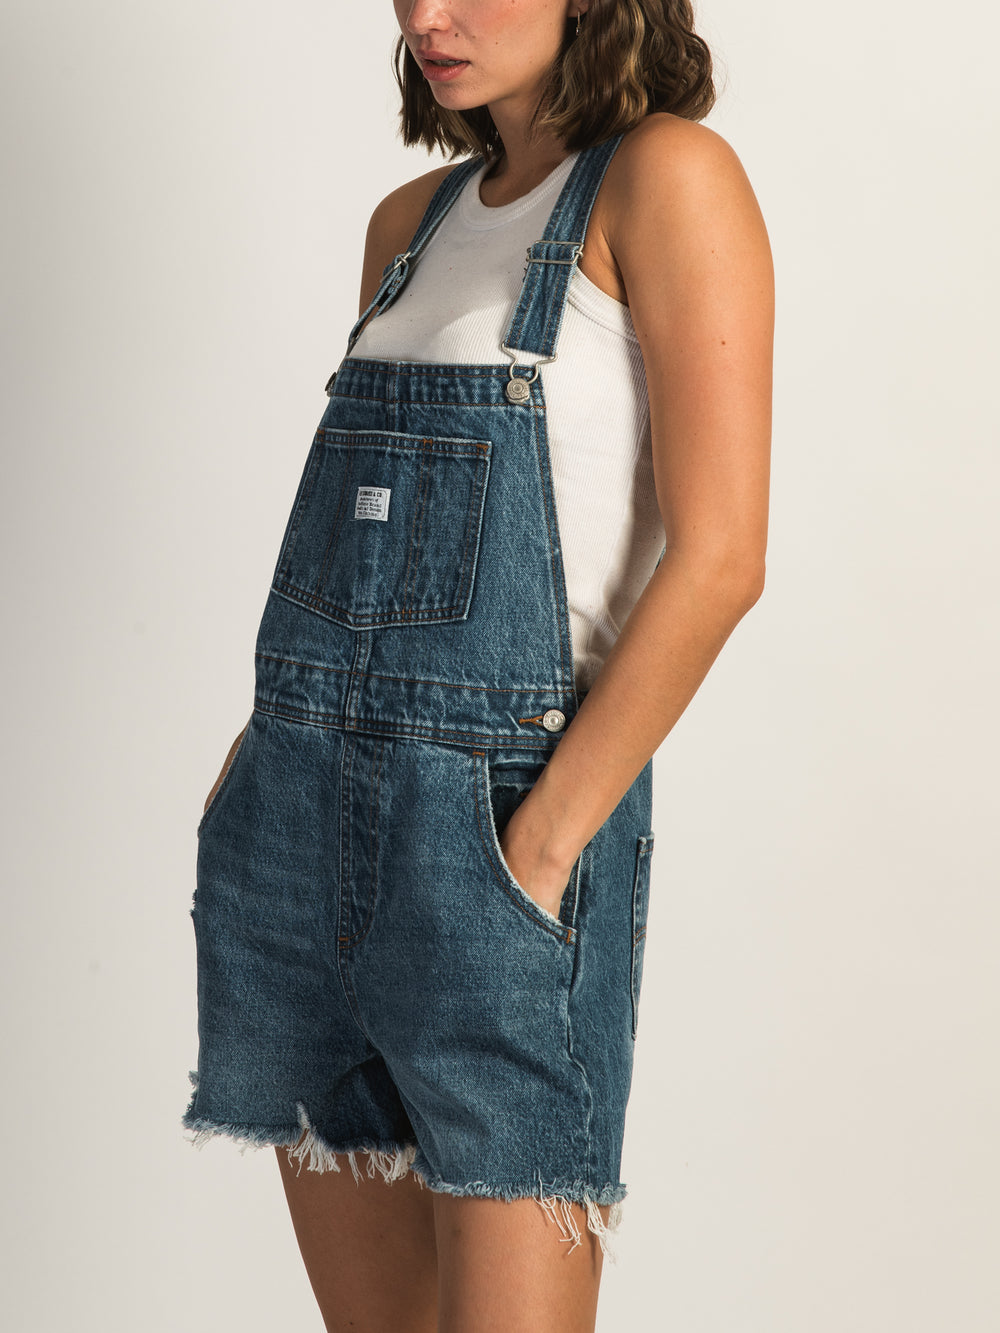 LEVIS VINTAGE SHORTALL MEADOW GAME